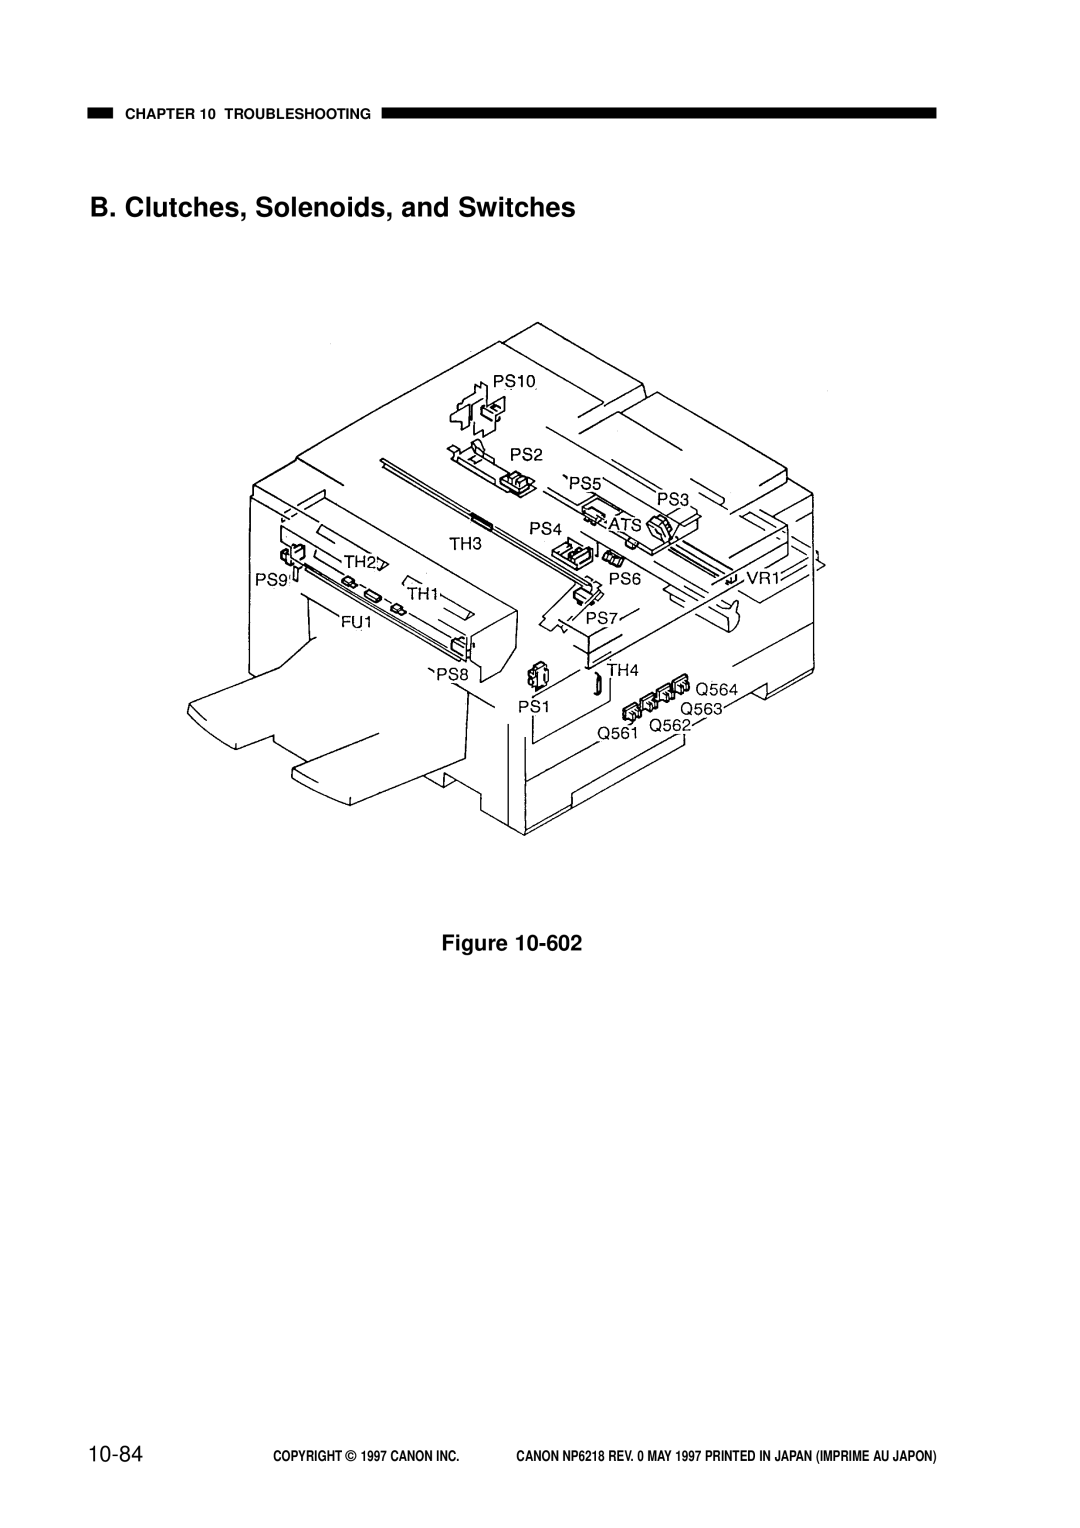 Canon NP6218, FY8-13EX-000 B. Clutches, Solenoids, and Switches, 10-84, Troubleshooting, COPYRIGHT 1997 CANON INC 